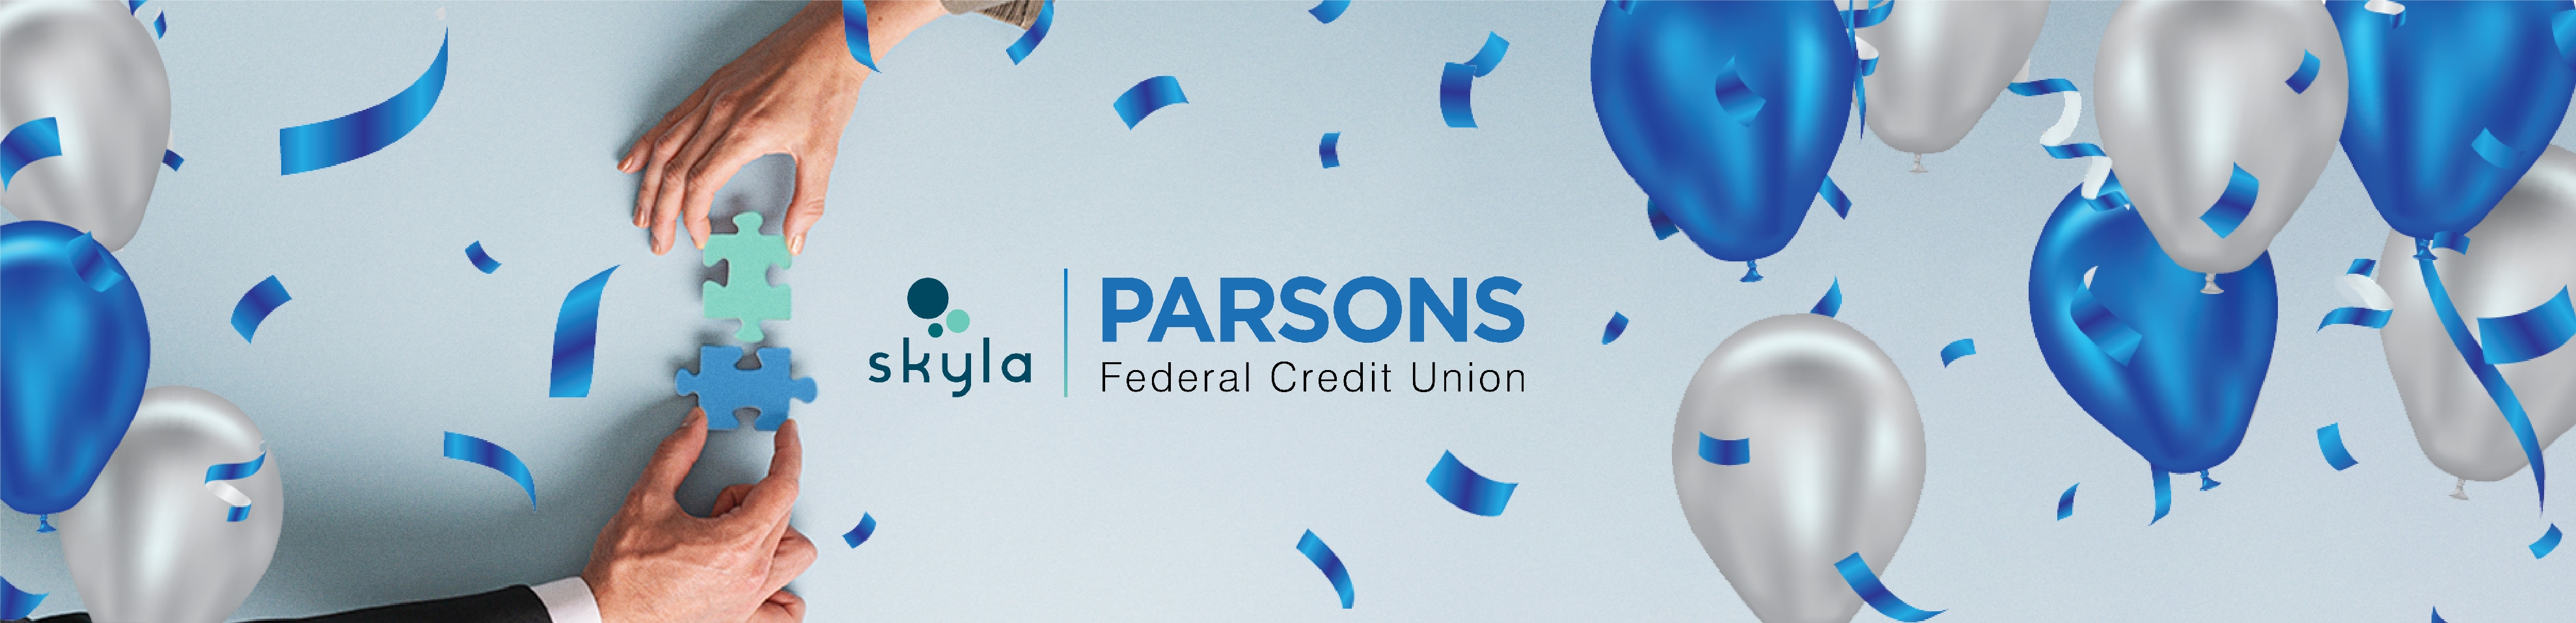 Parsons Federal Credit Union